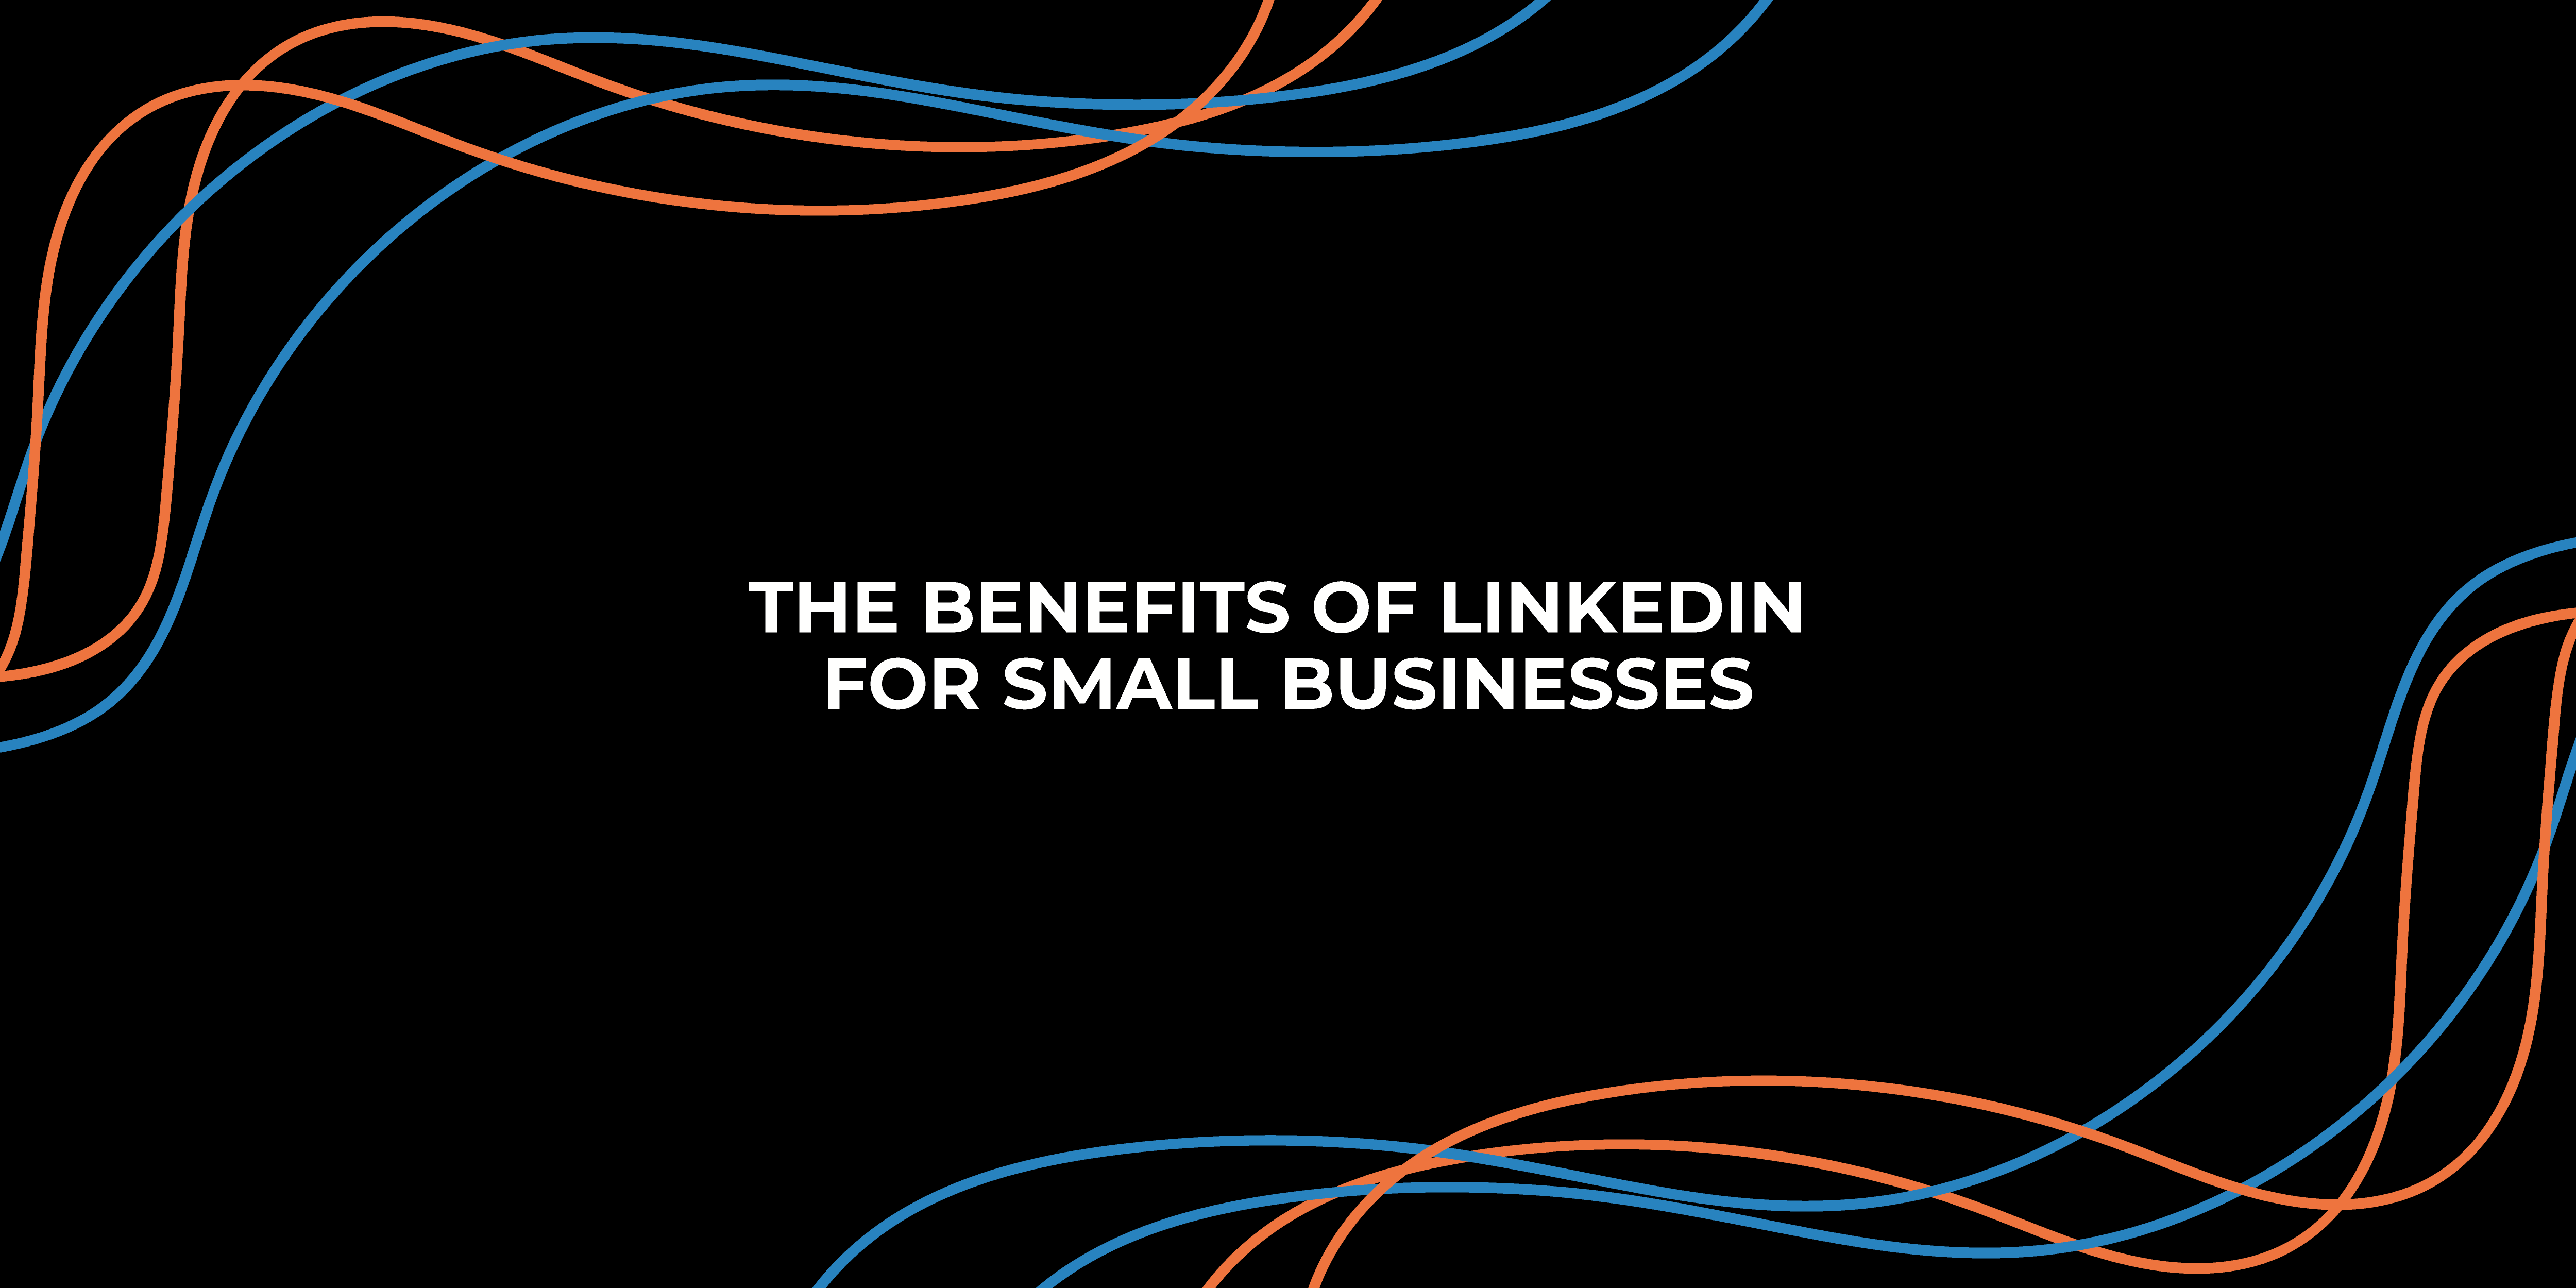 The Benefits of LinkedIn for Small Businesses